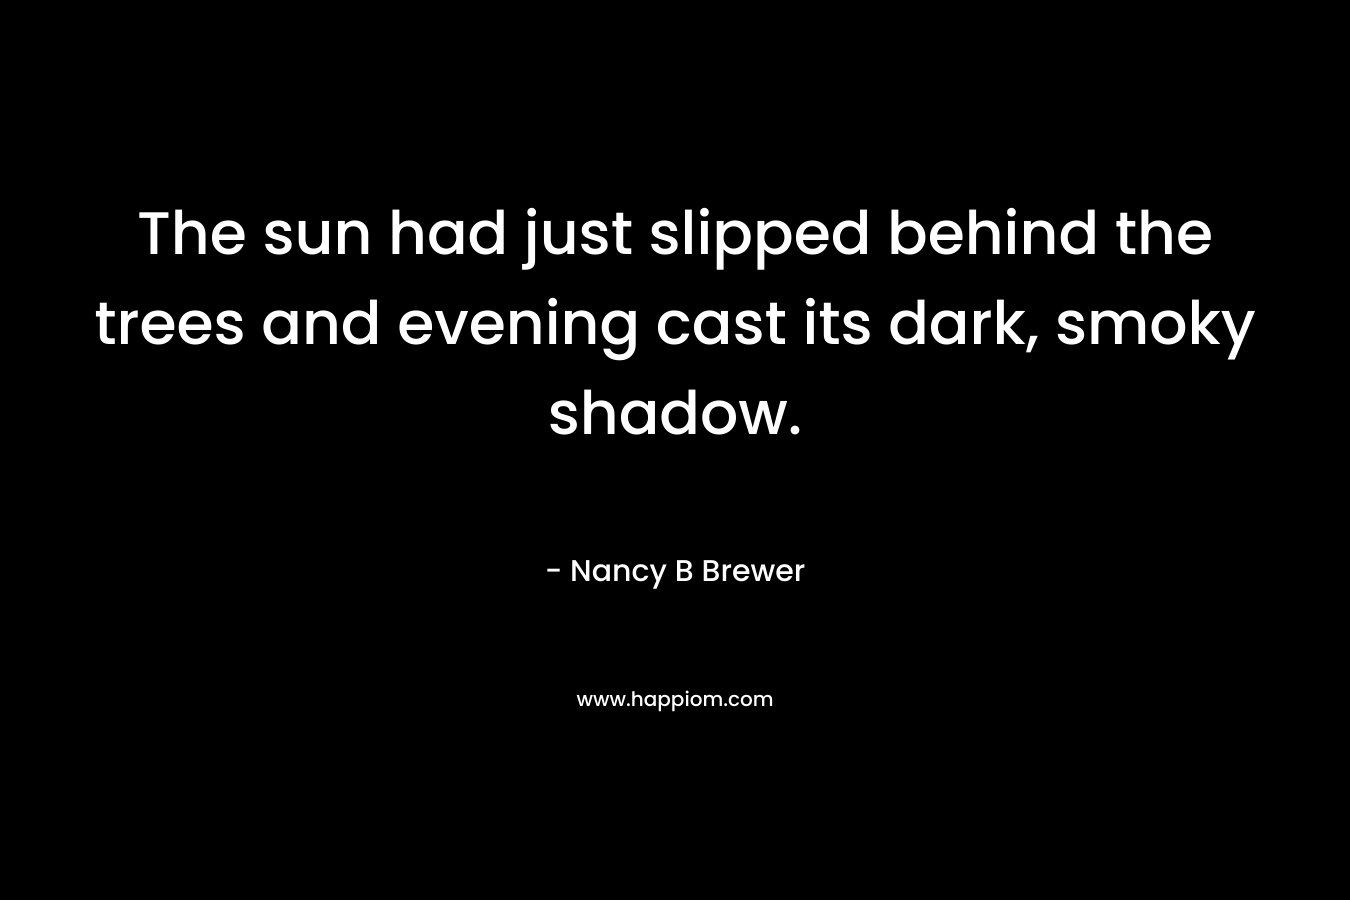 The sun had just slipped behind the trees and evening cast its dark, smoky shadow. – Nancy B Brewer